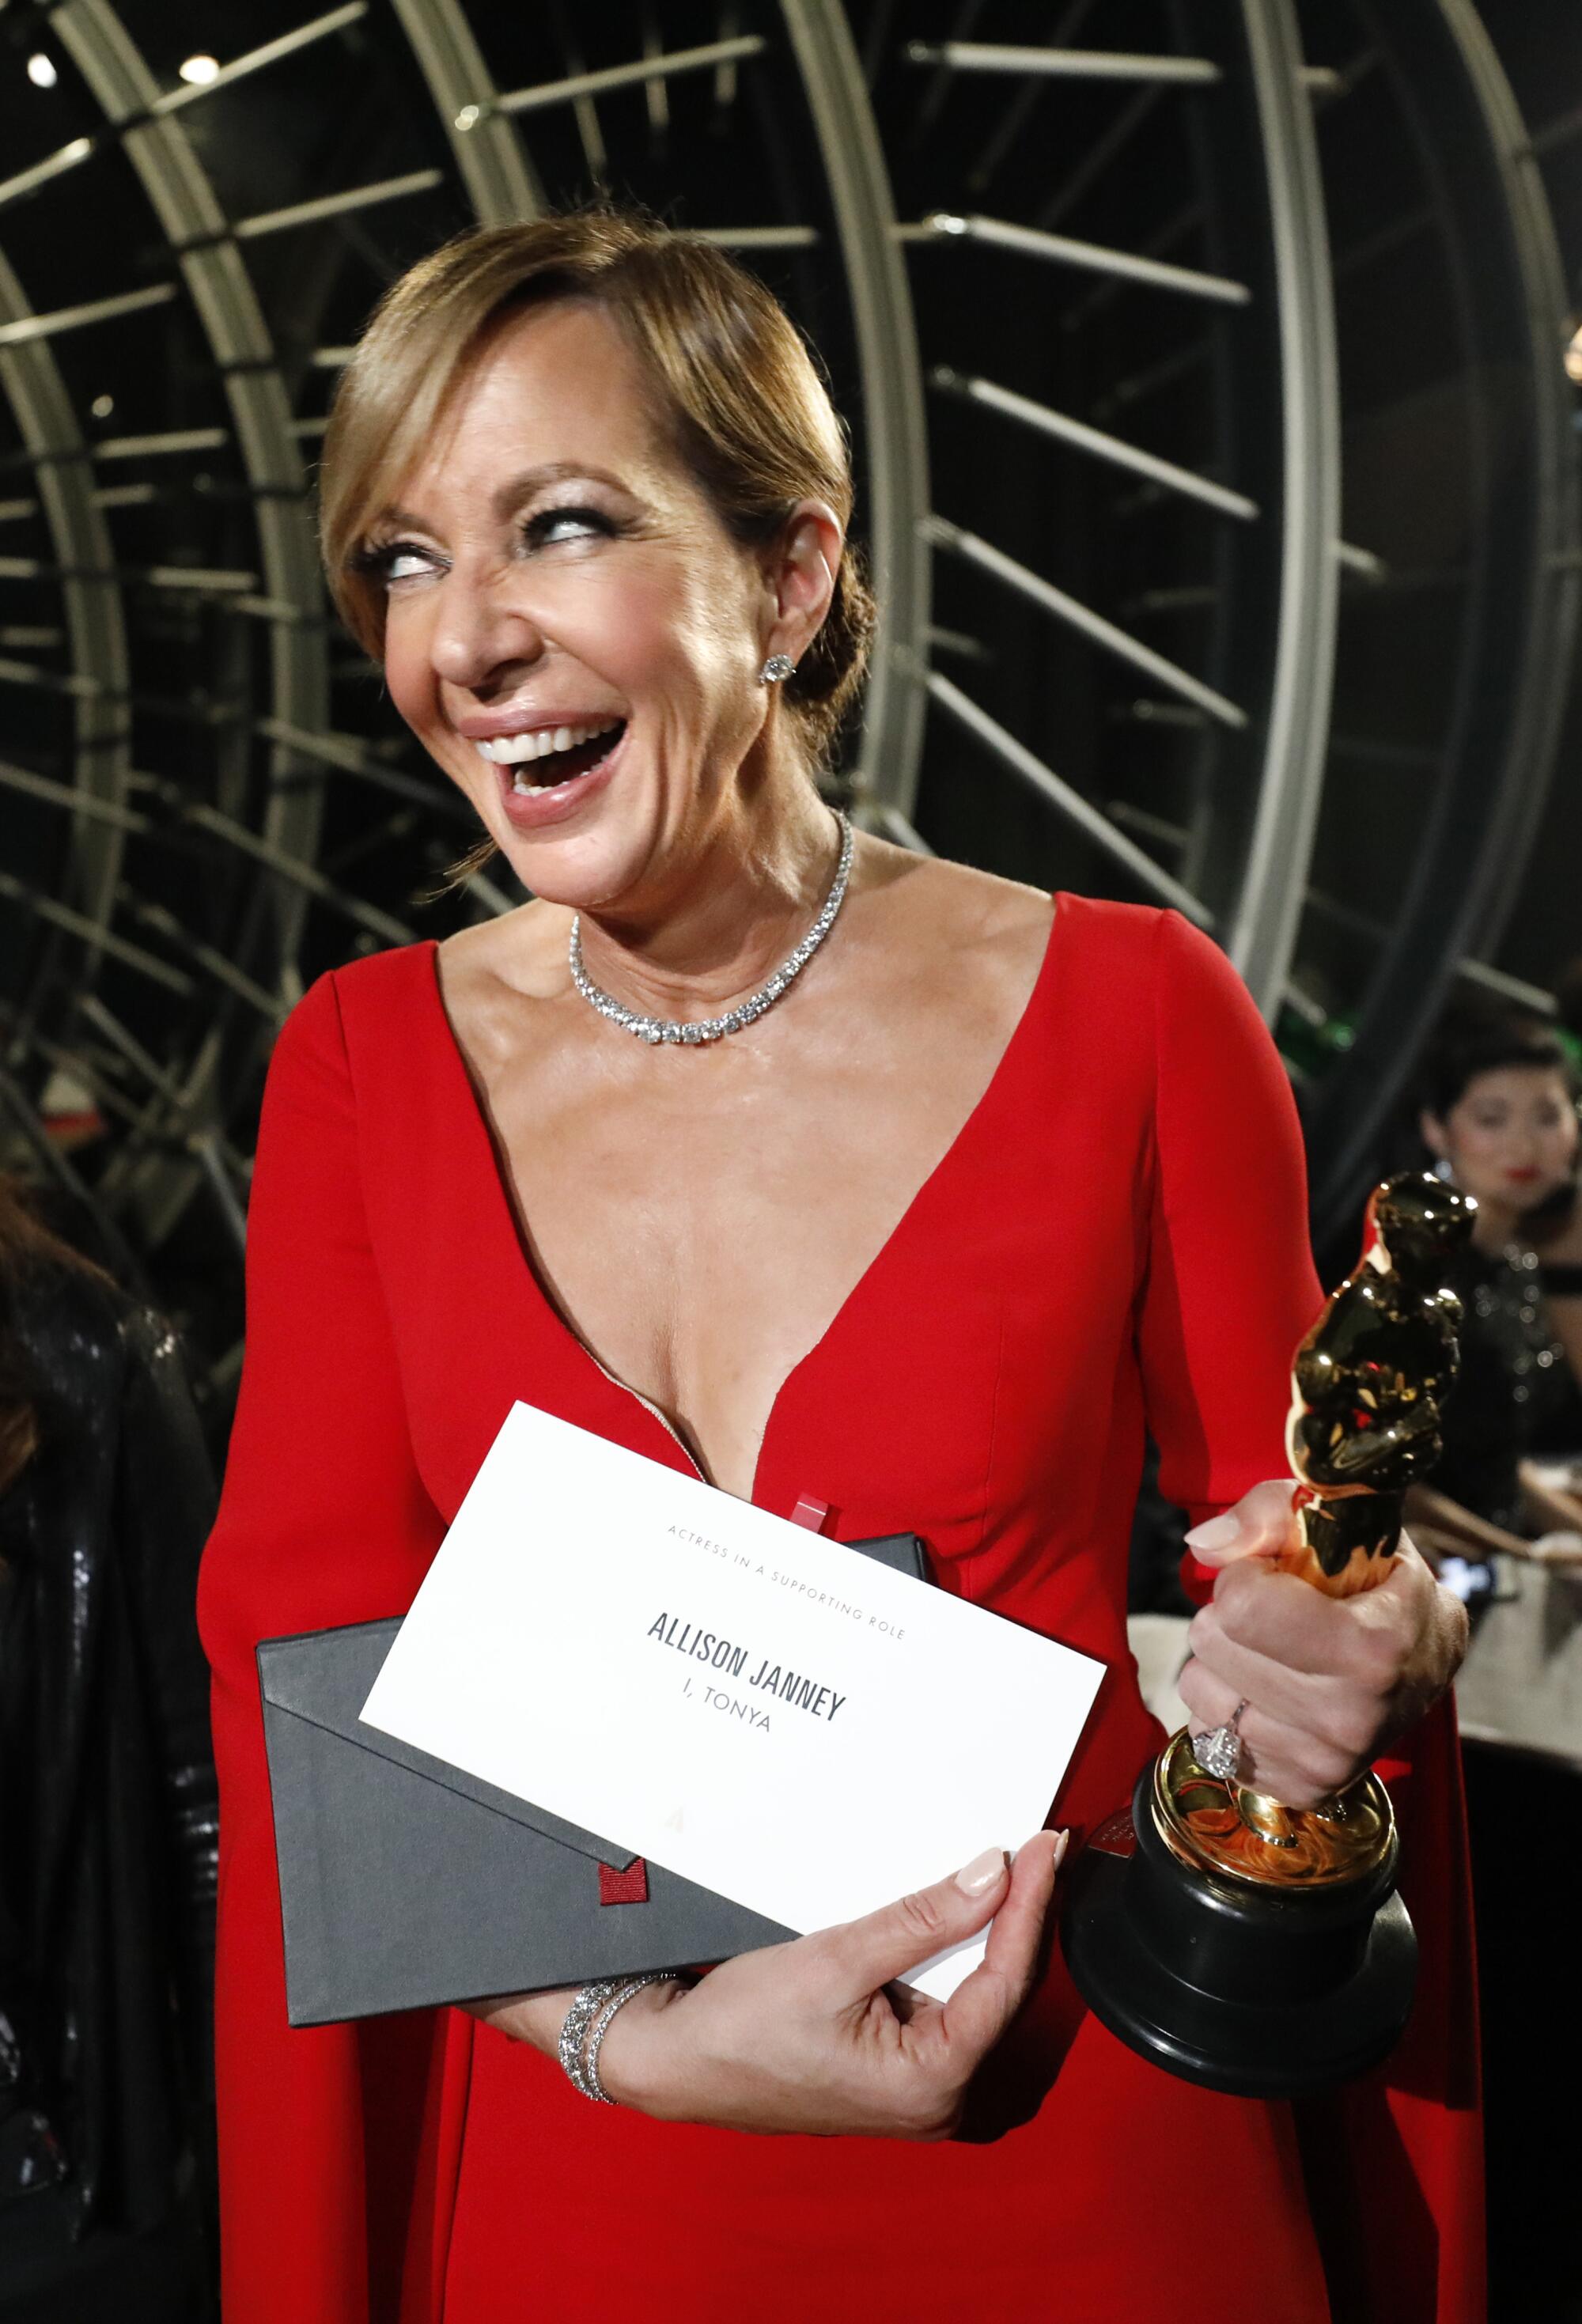 2018: Allison Janney beams with joy while showing off her Oscar and "the envelope, please."